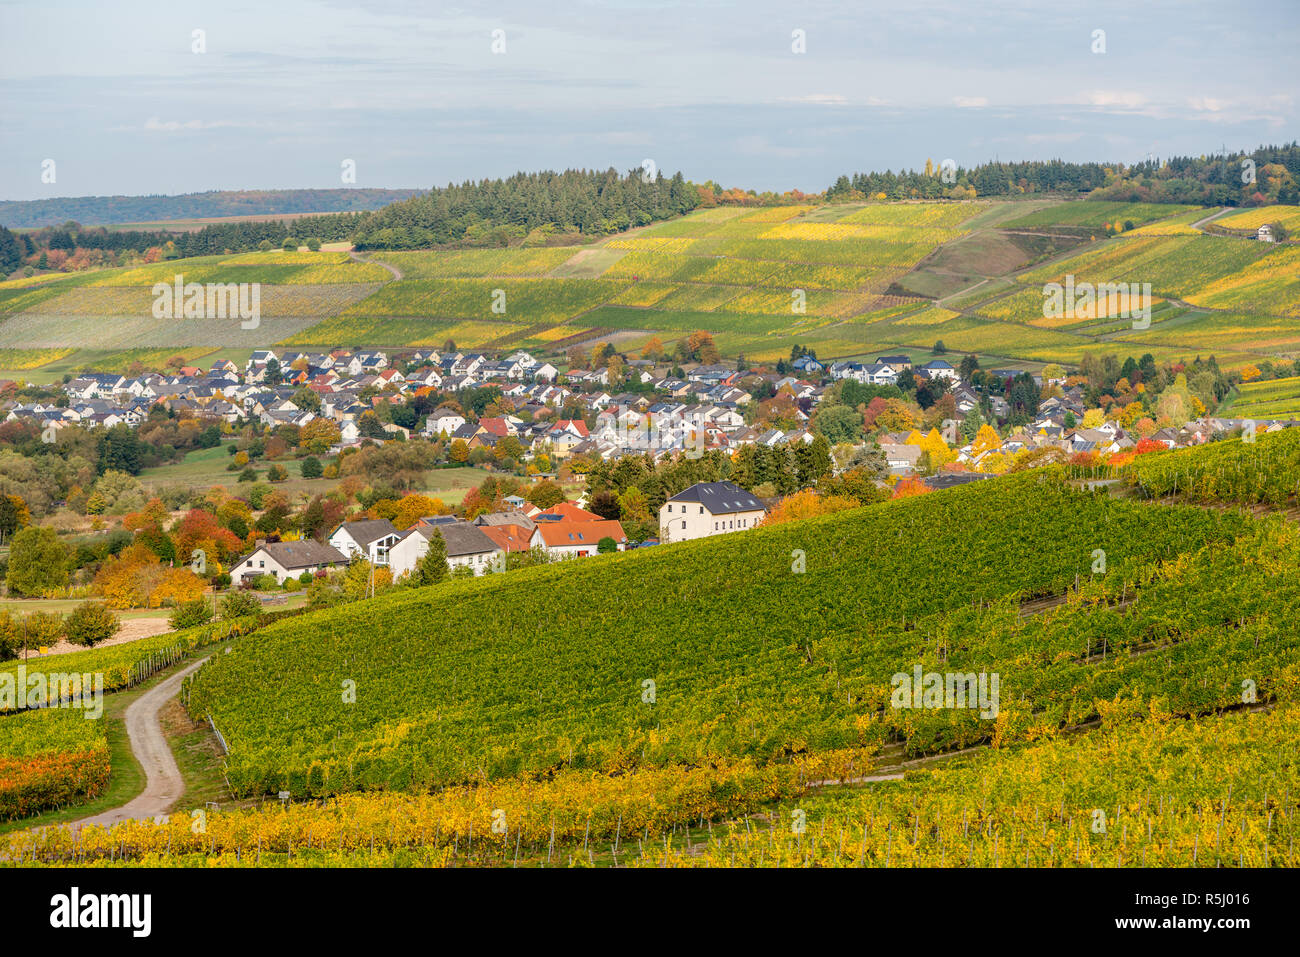 Landscape with vineyards along the Moselle River and valley near the town of Konz, Rhineland-Palatinate, Germany, Europe Stock Photo